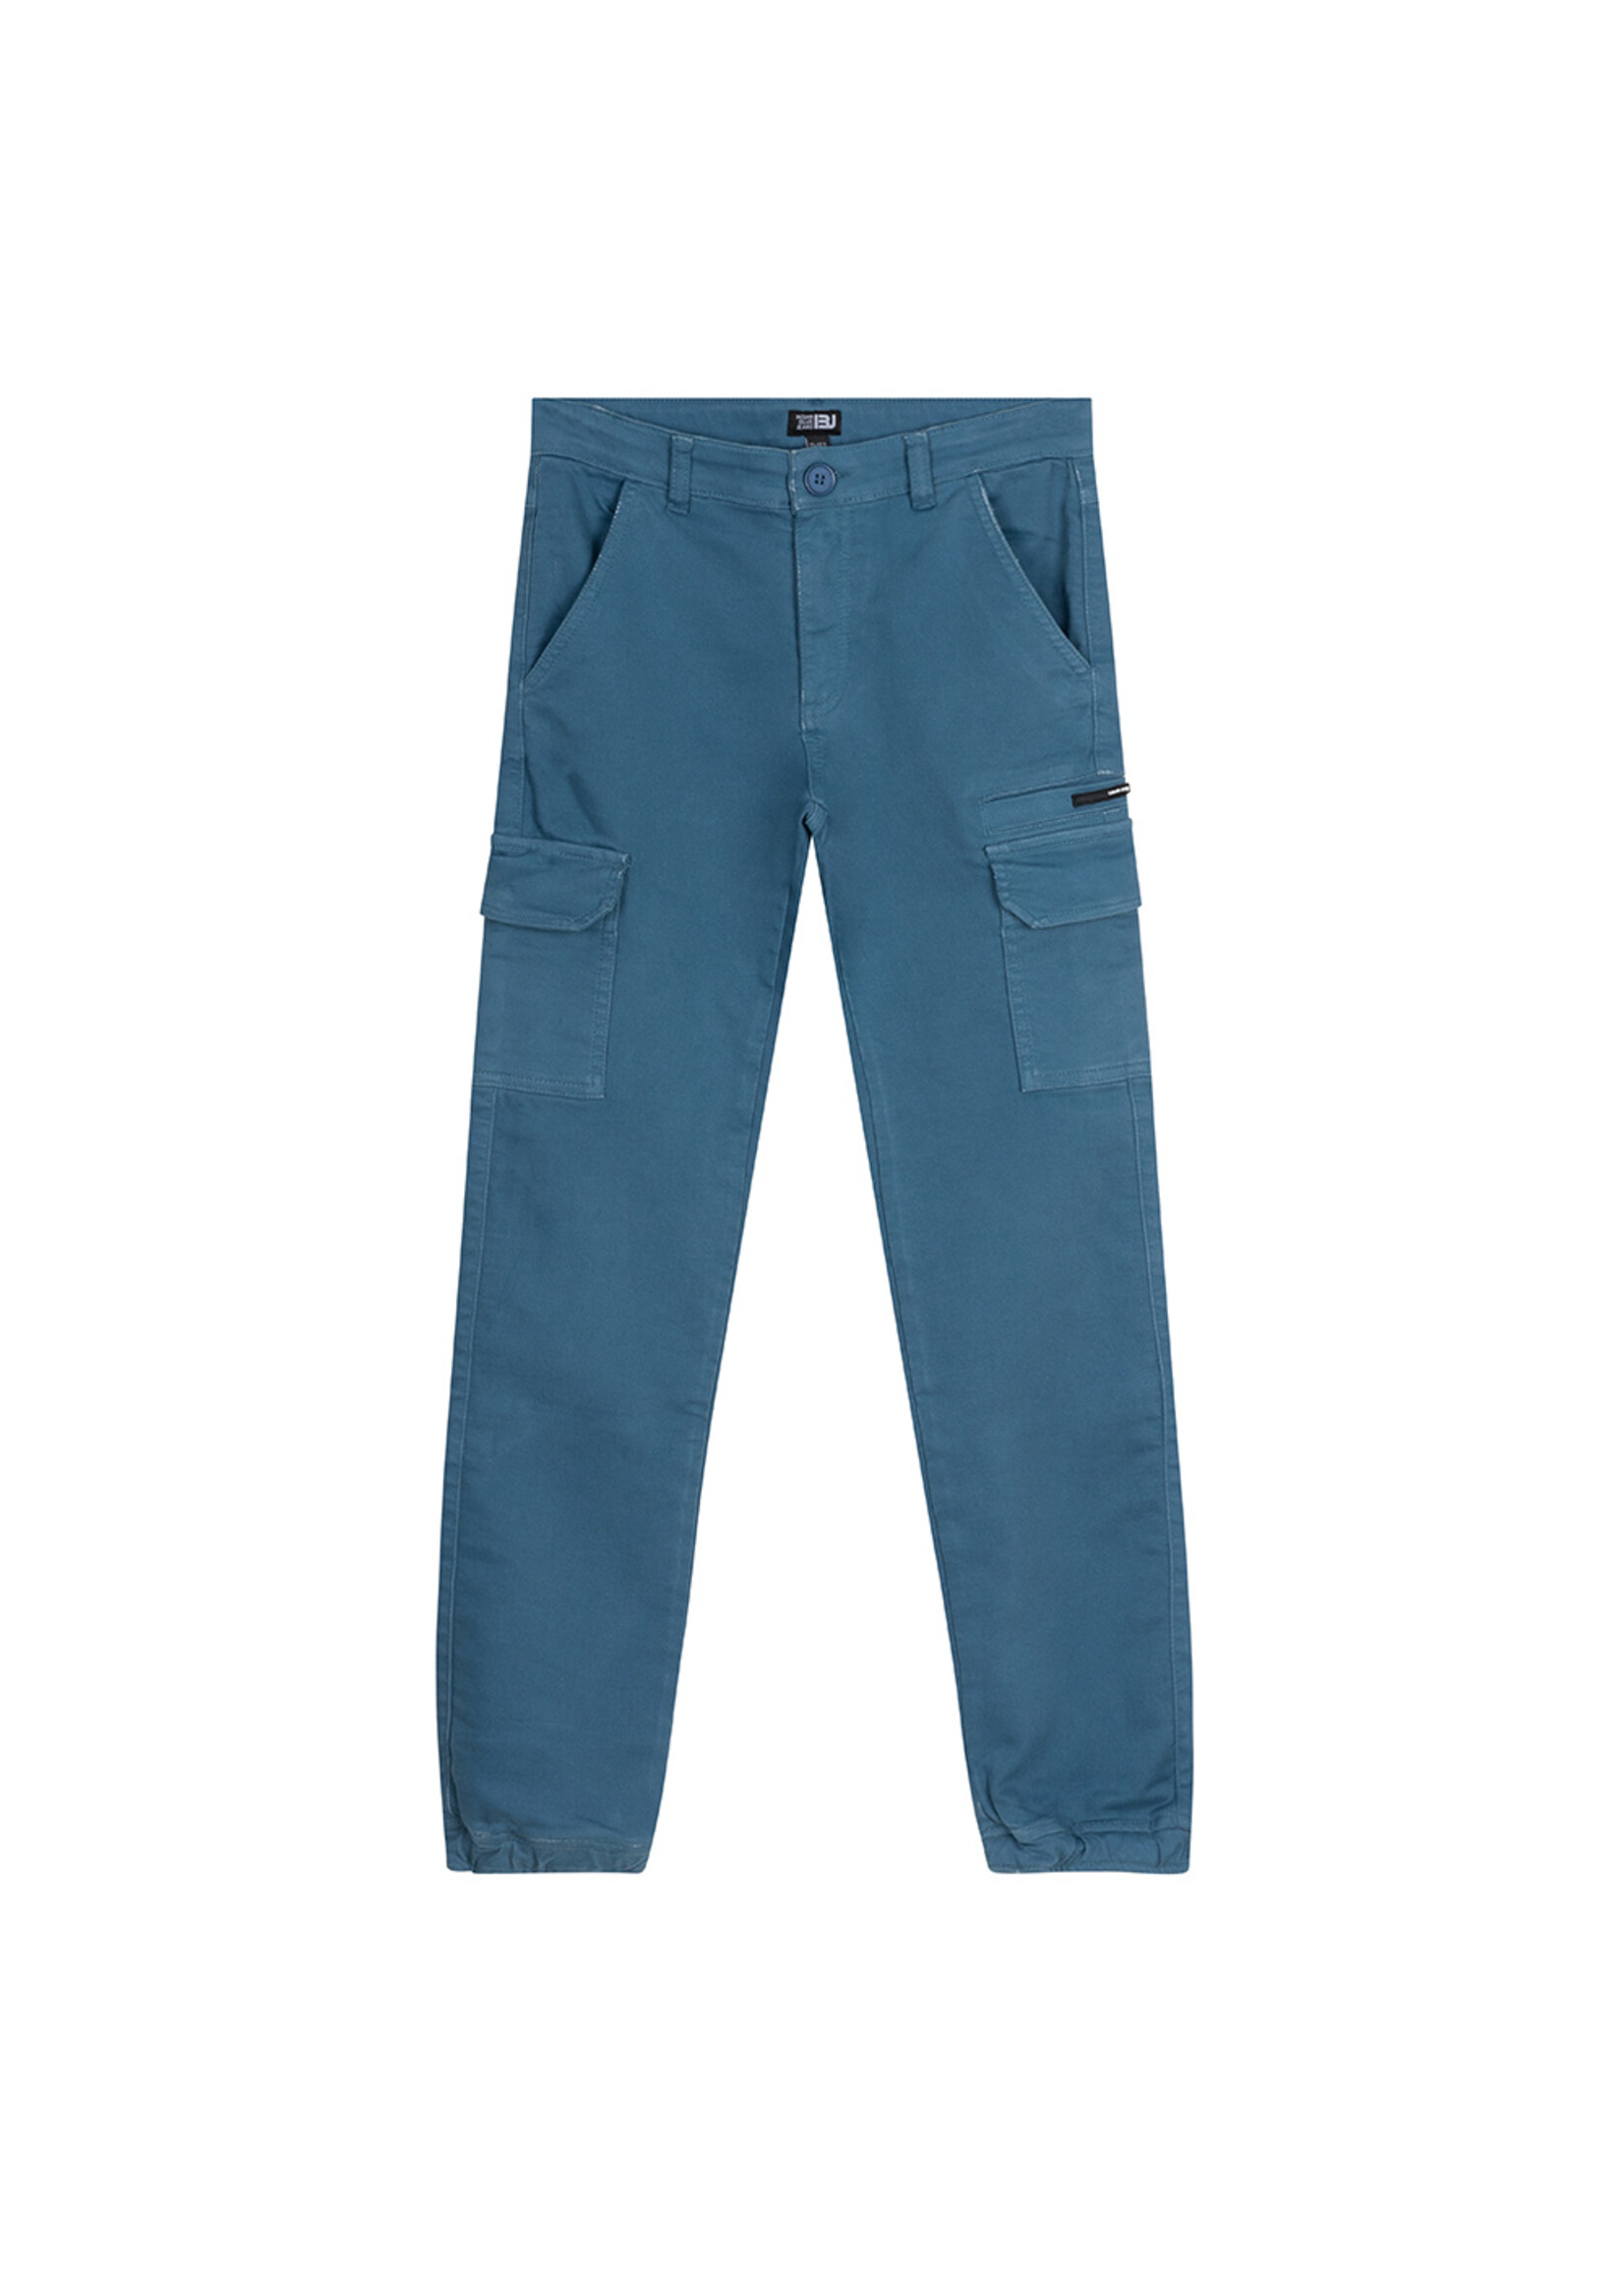 Indian Blue Jeans Cargo Pant Steel Blue